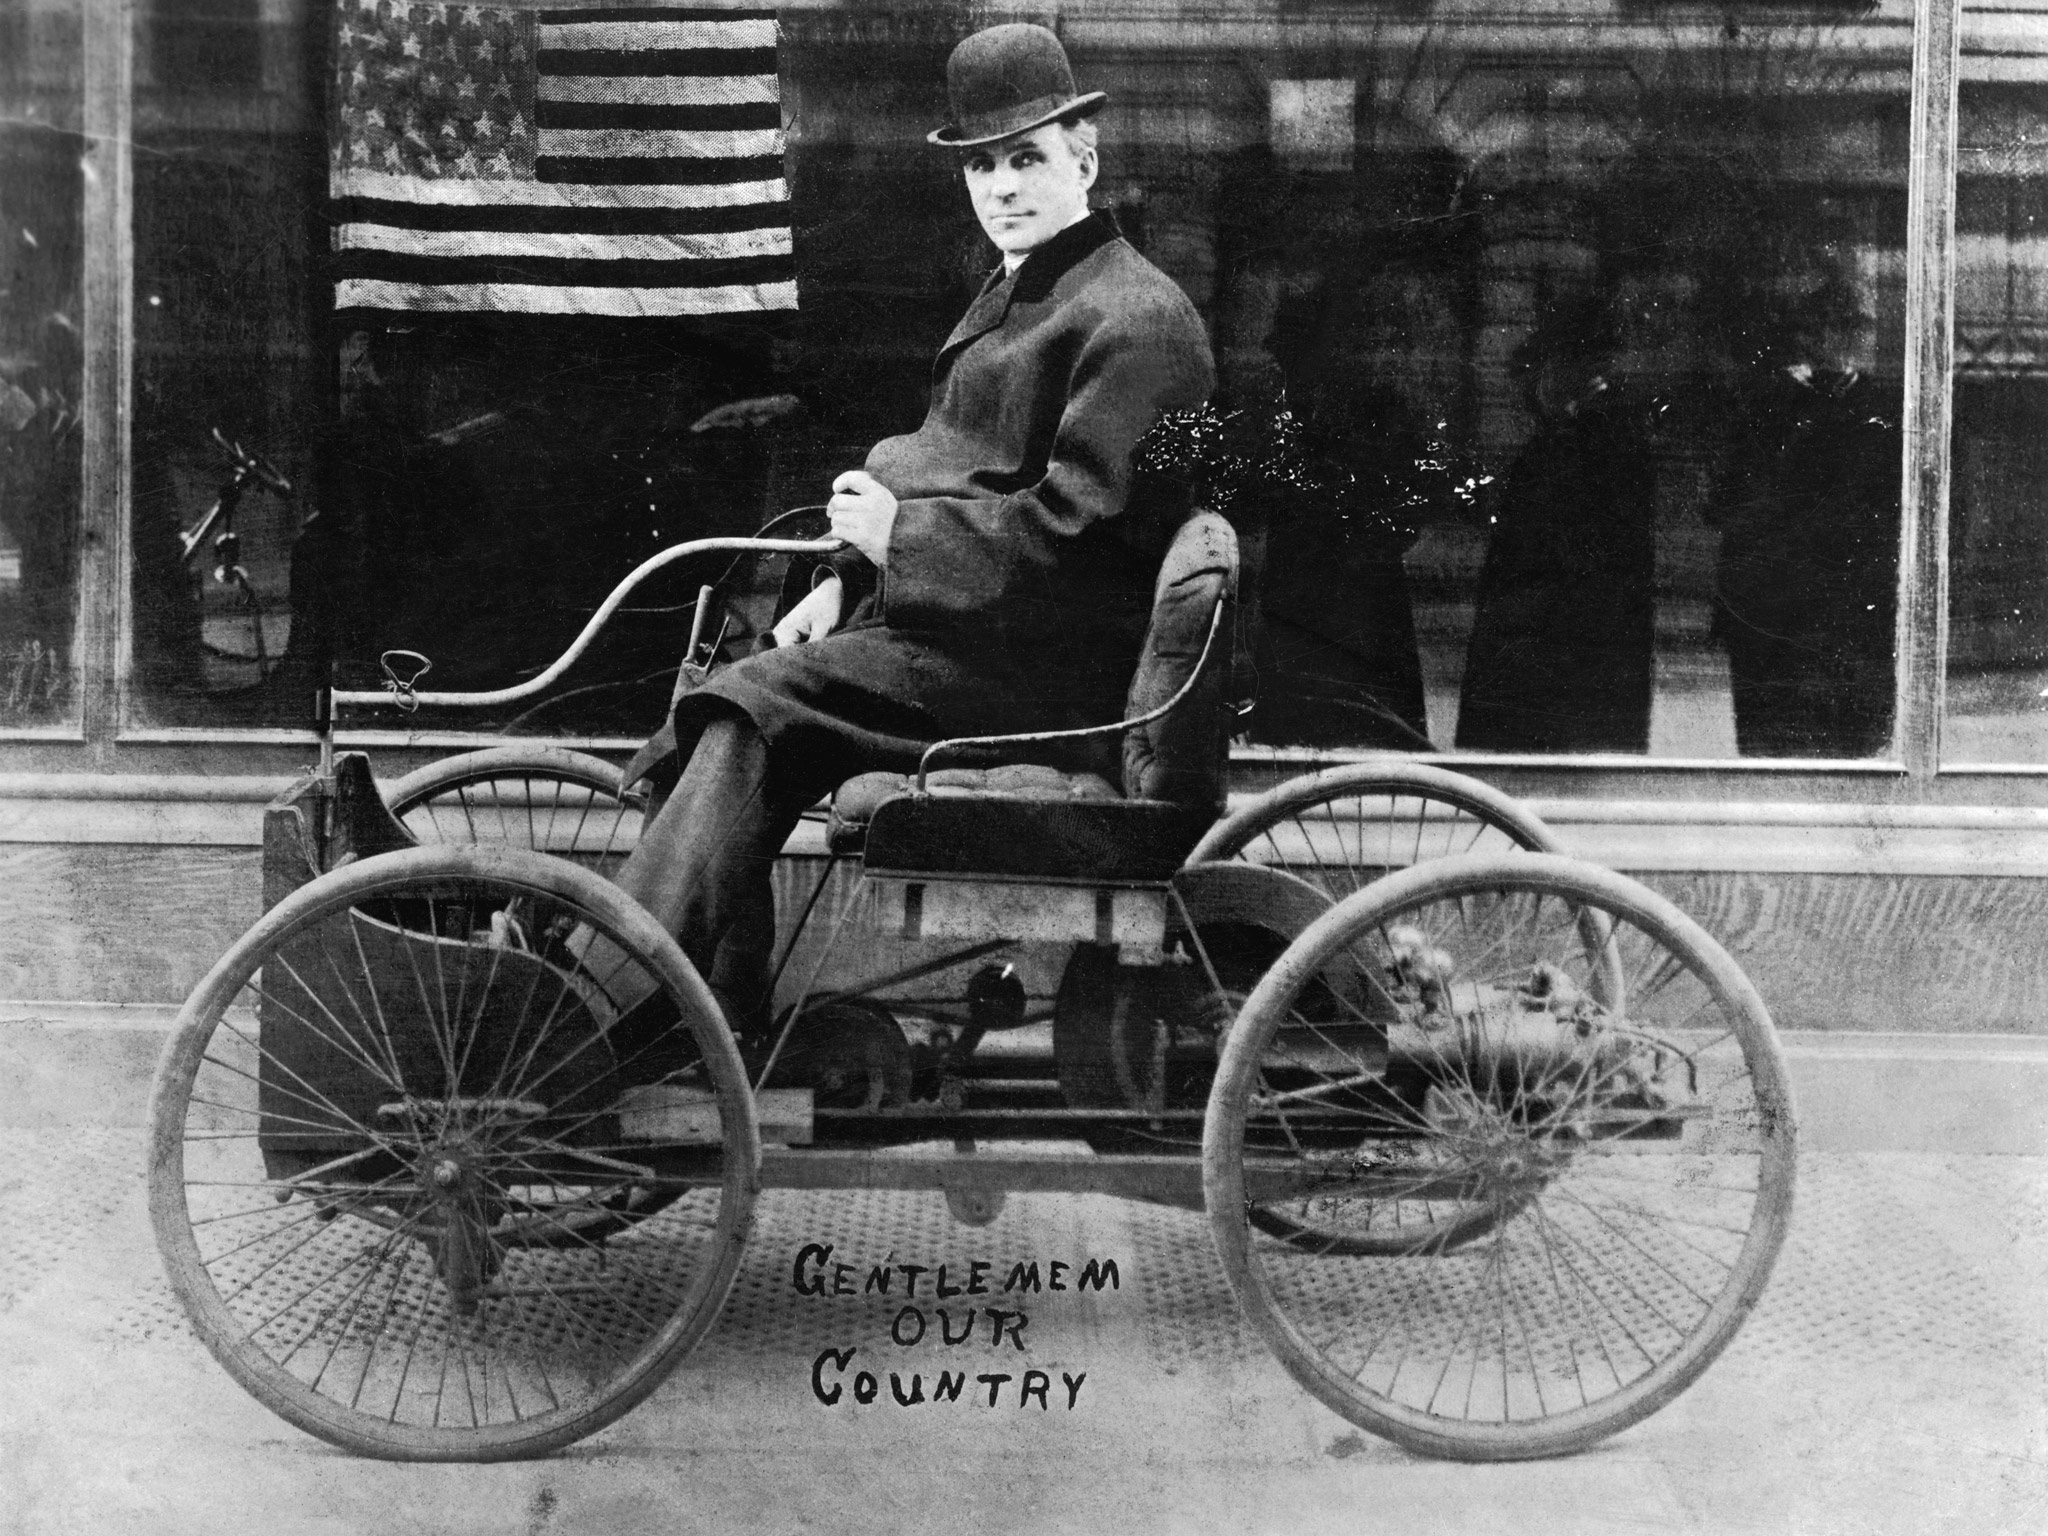 Henry Ford in his first car a picture from the past Art and design